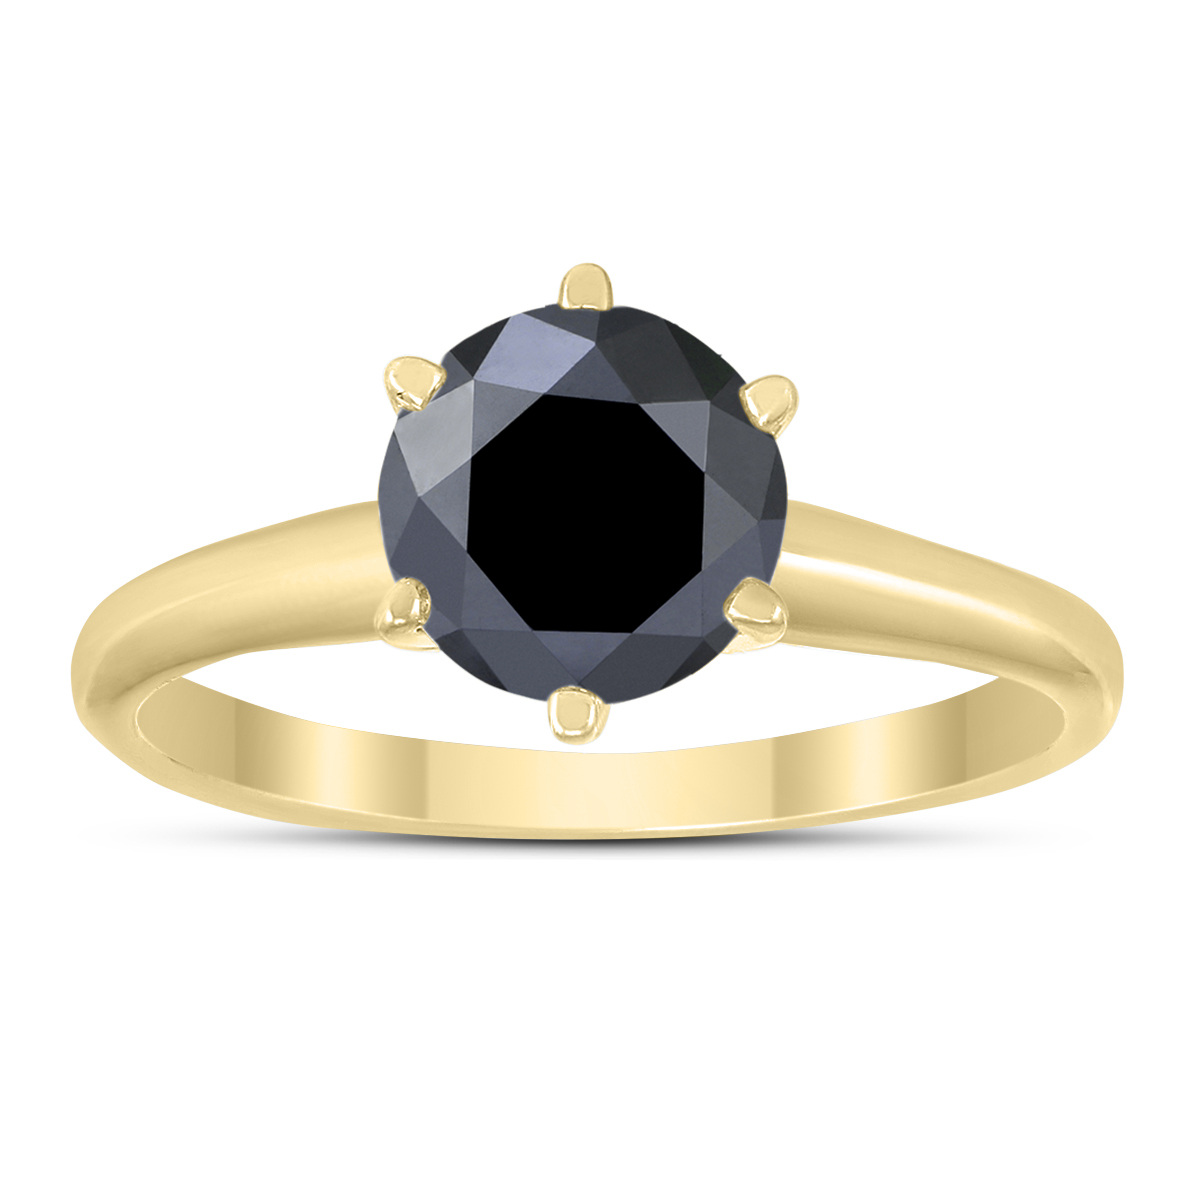 1 1/2 Carat Round Black Diamond Solitaire Ring in 14K Yellow Gold